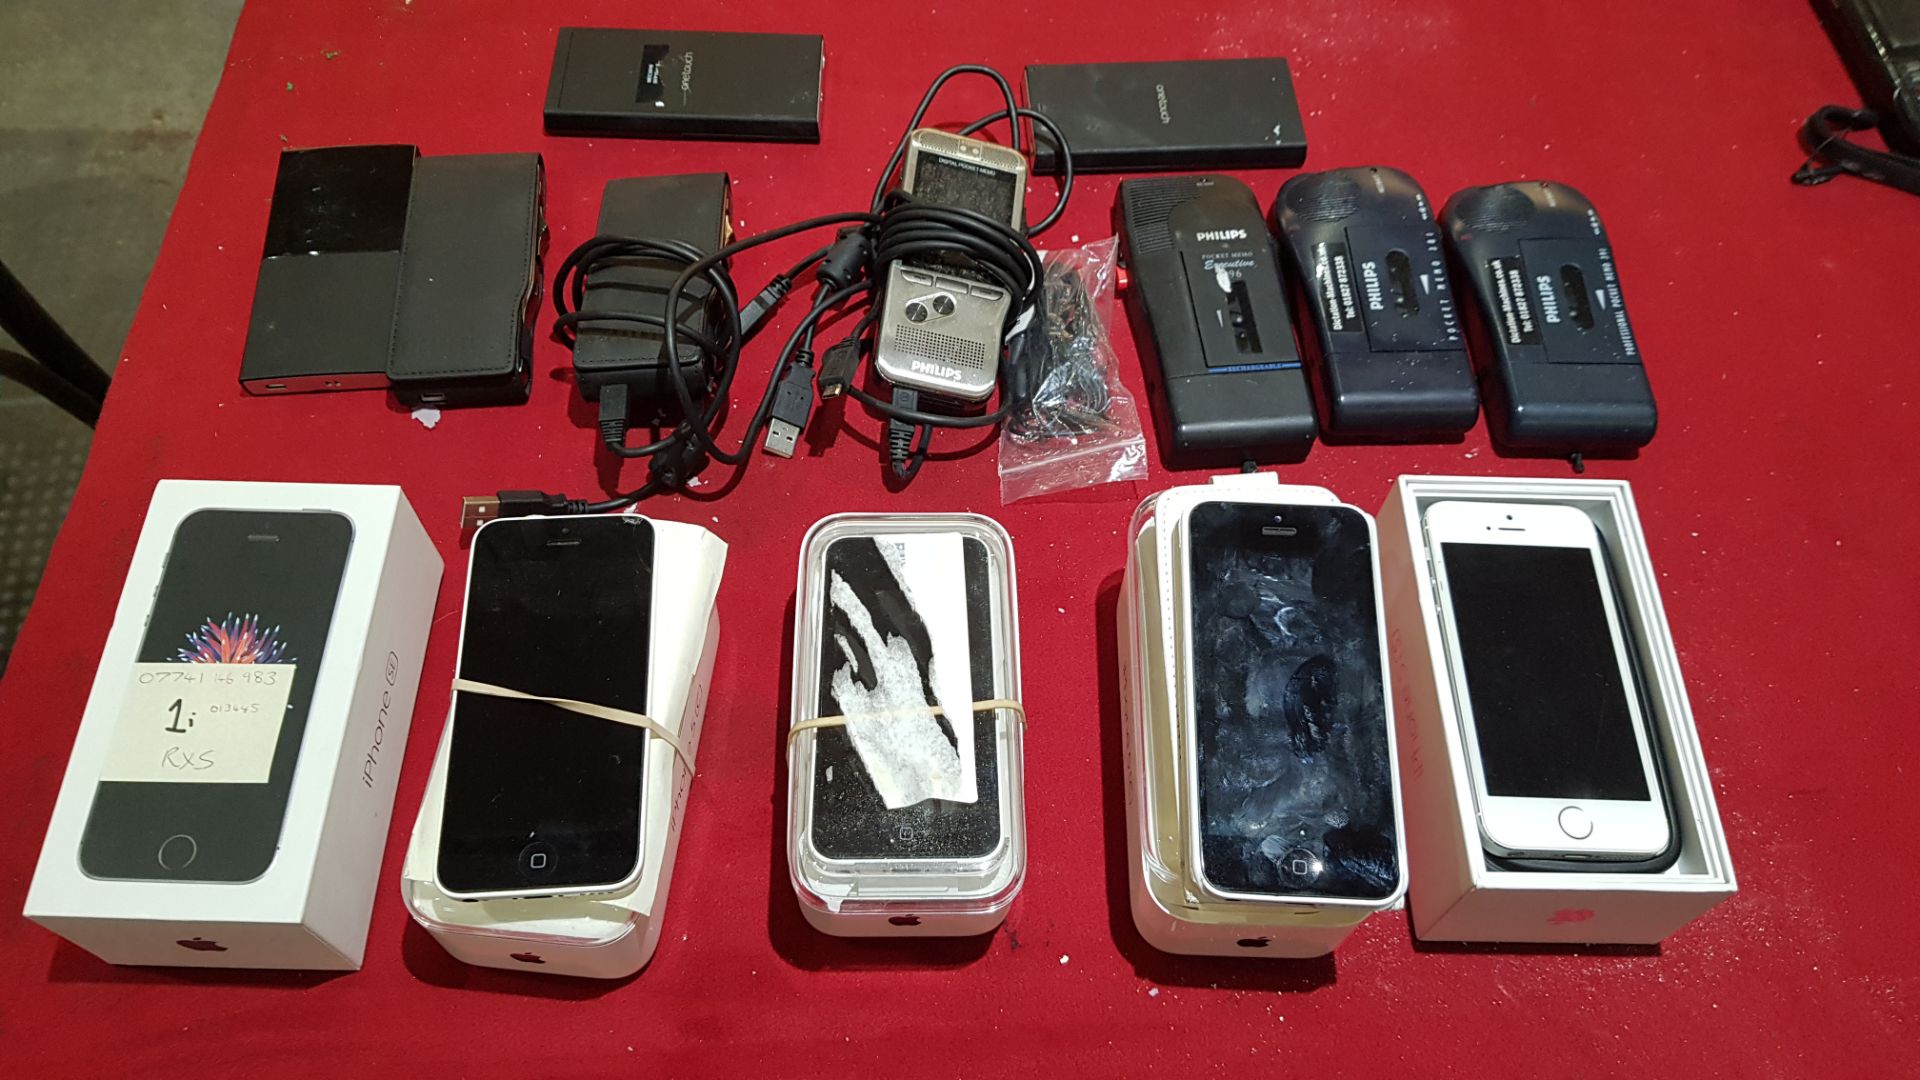 5 X VARIOUS MOBILE PHONES INC I-PHONES PLUS 9 X RECORDING DEVICES - NO CHARGERS - CONSIDER AS